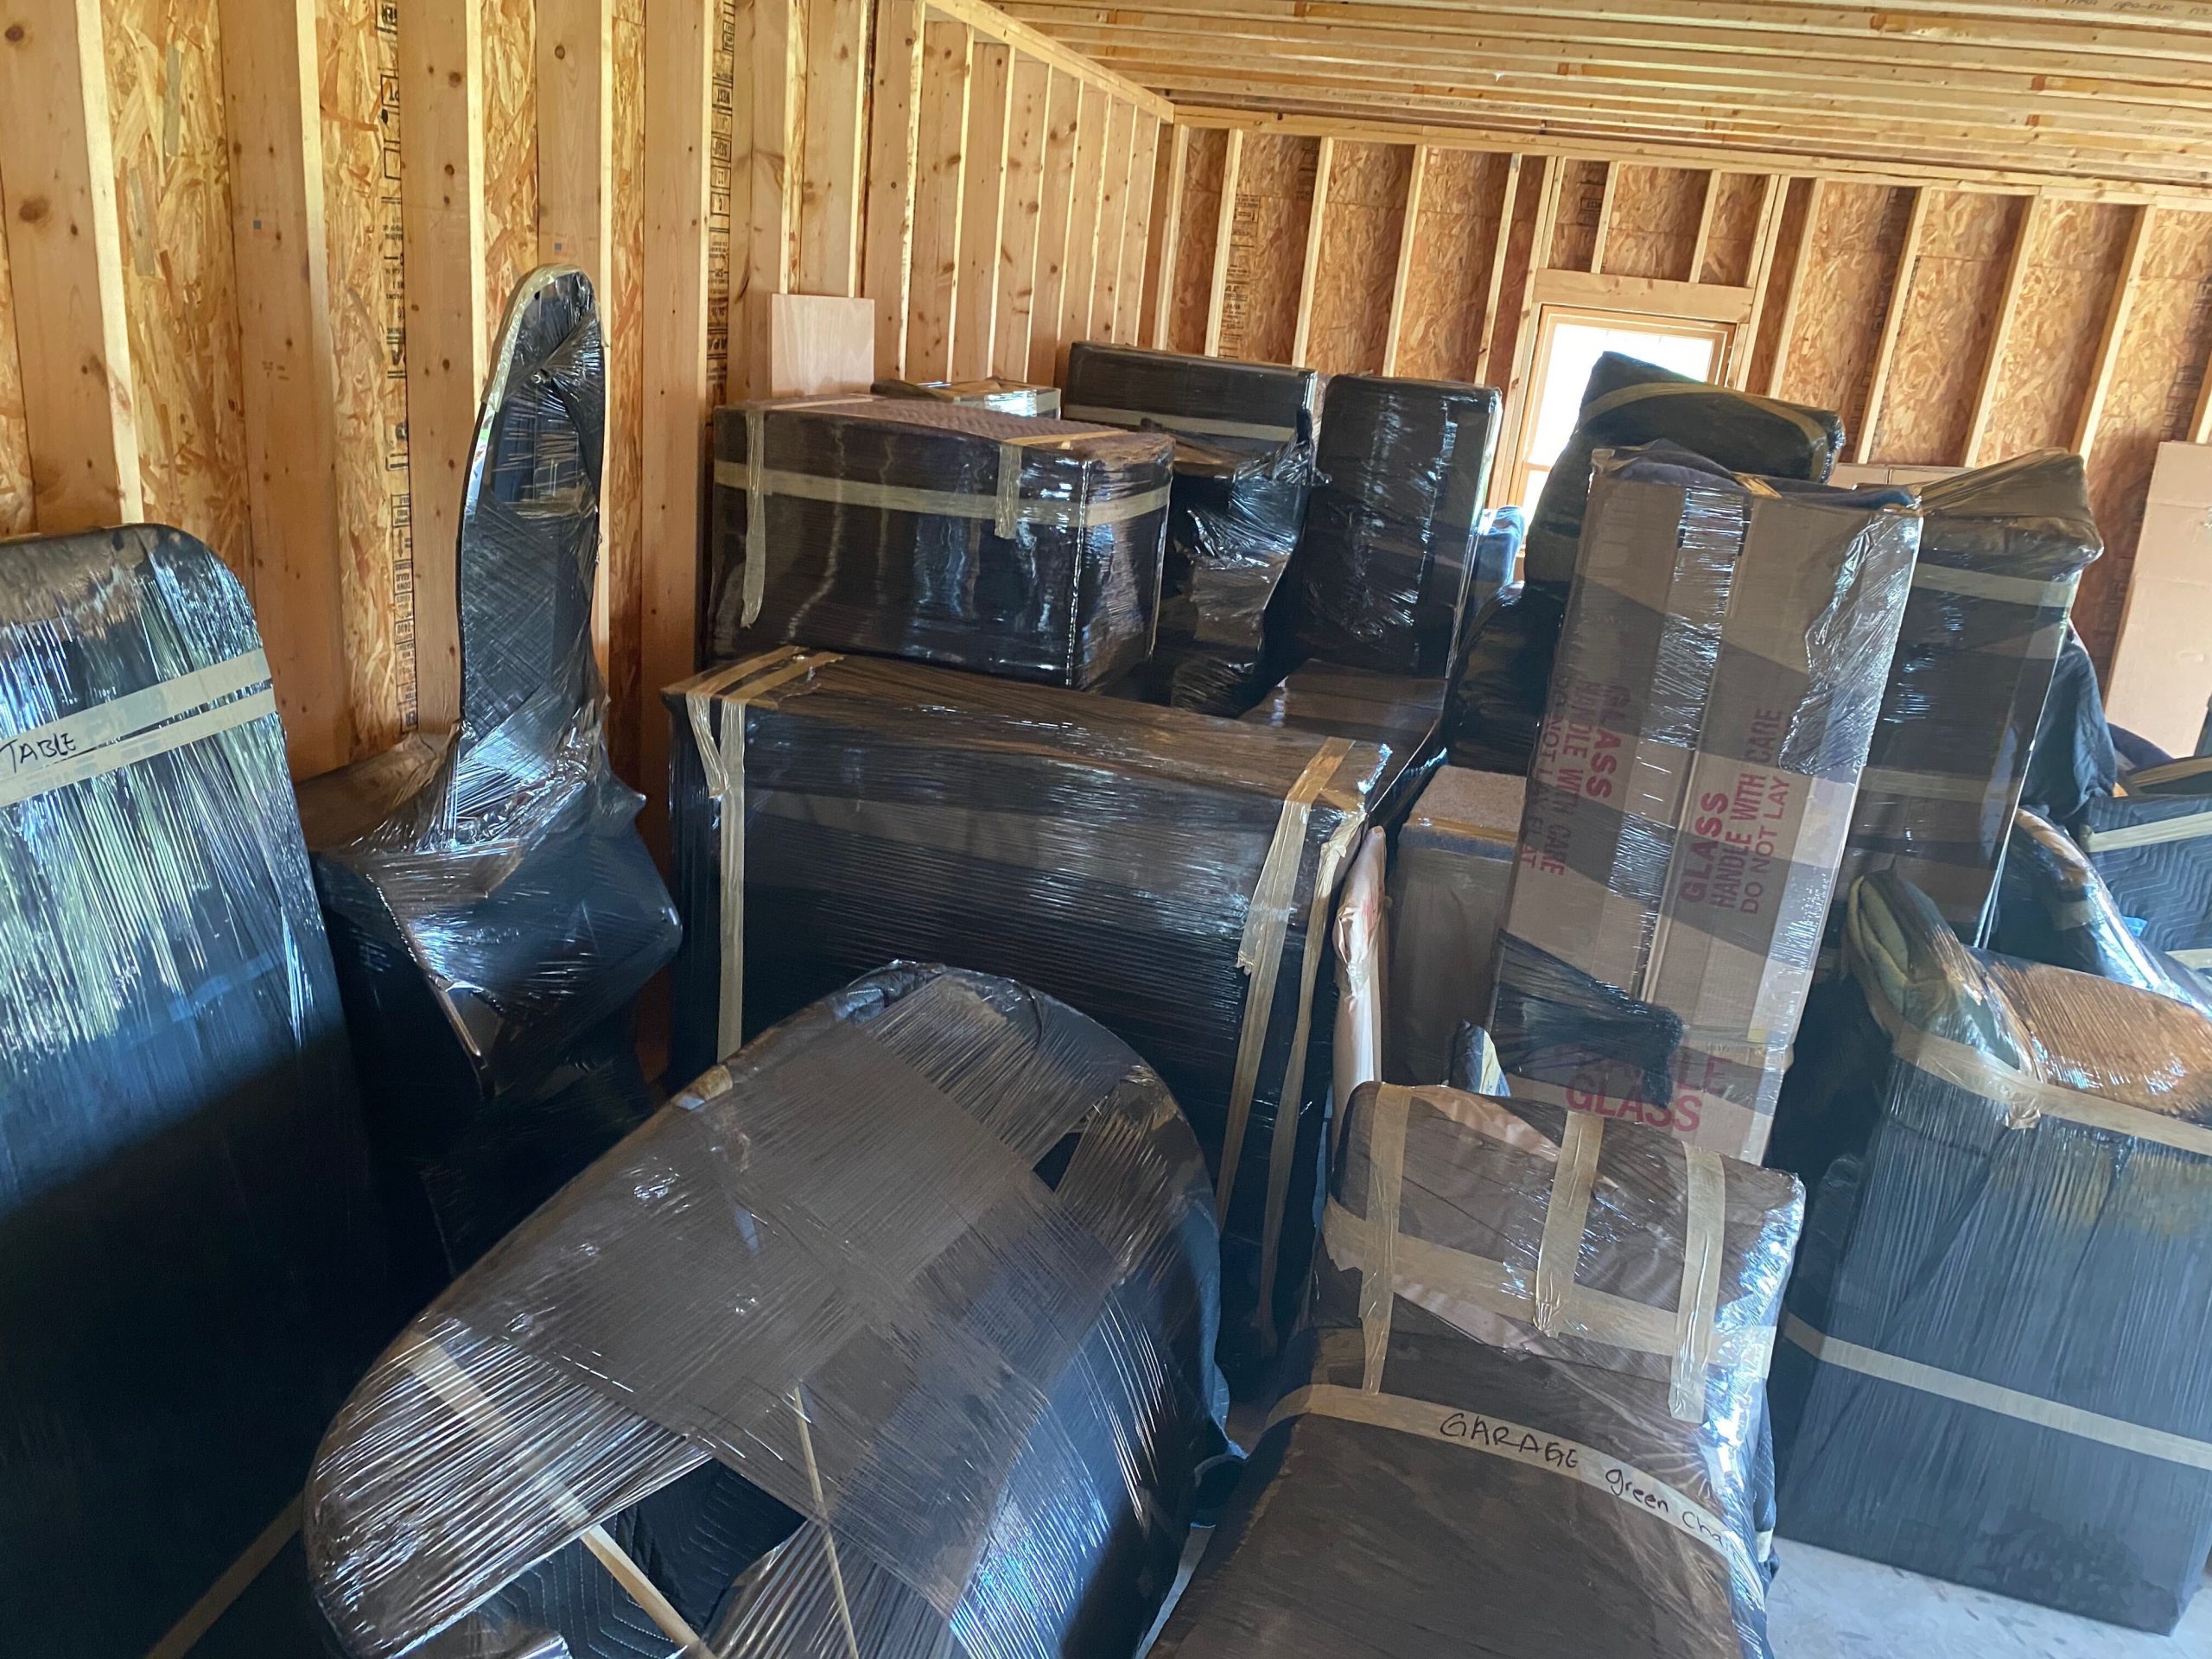 Antique Movers Northern Virginia - Certified Master Movers